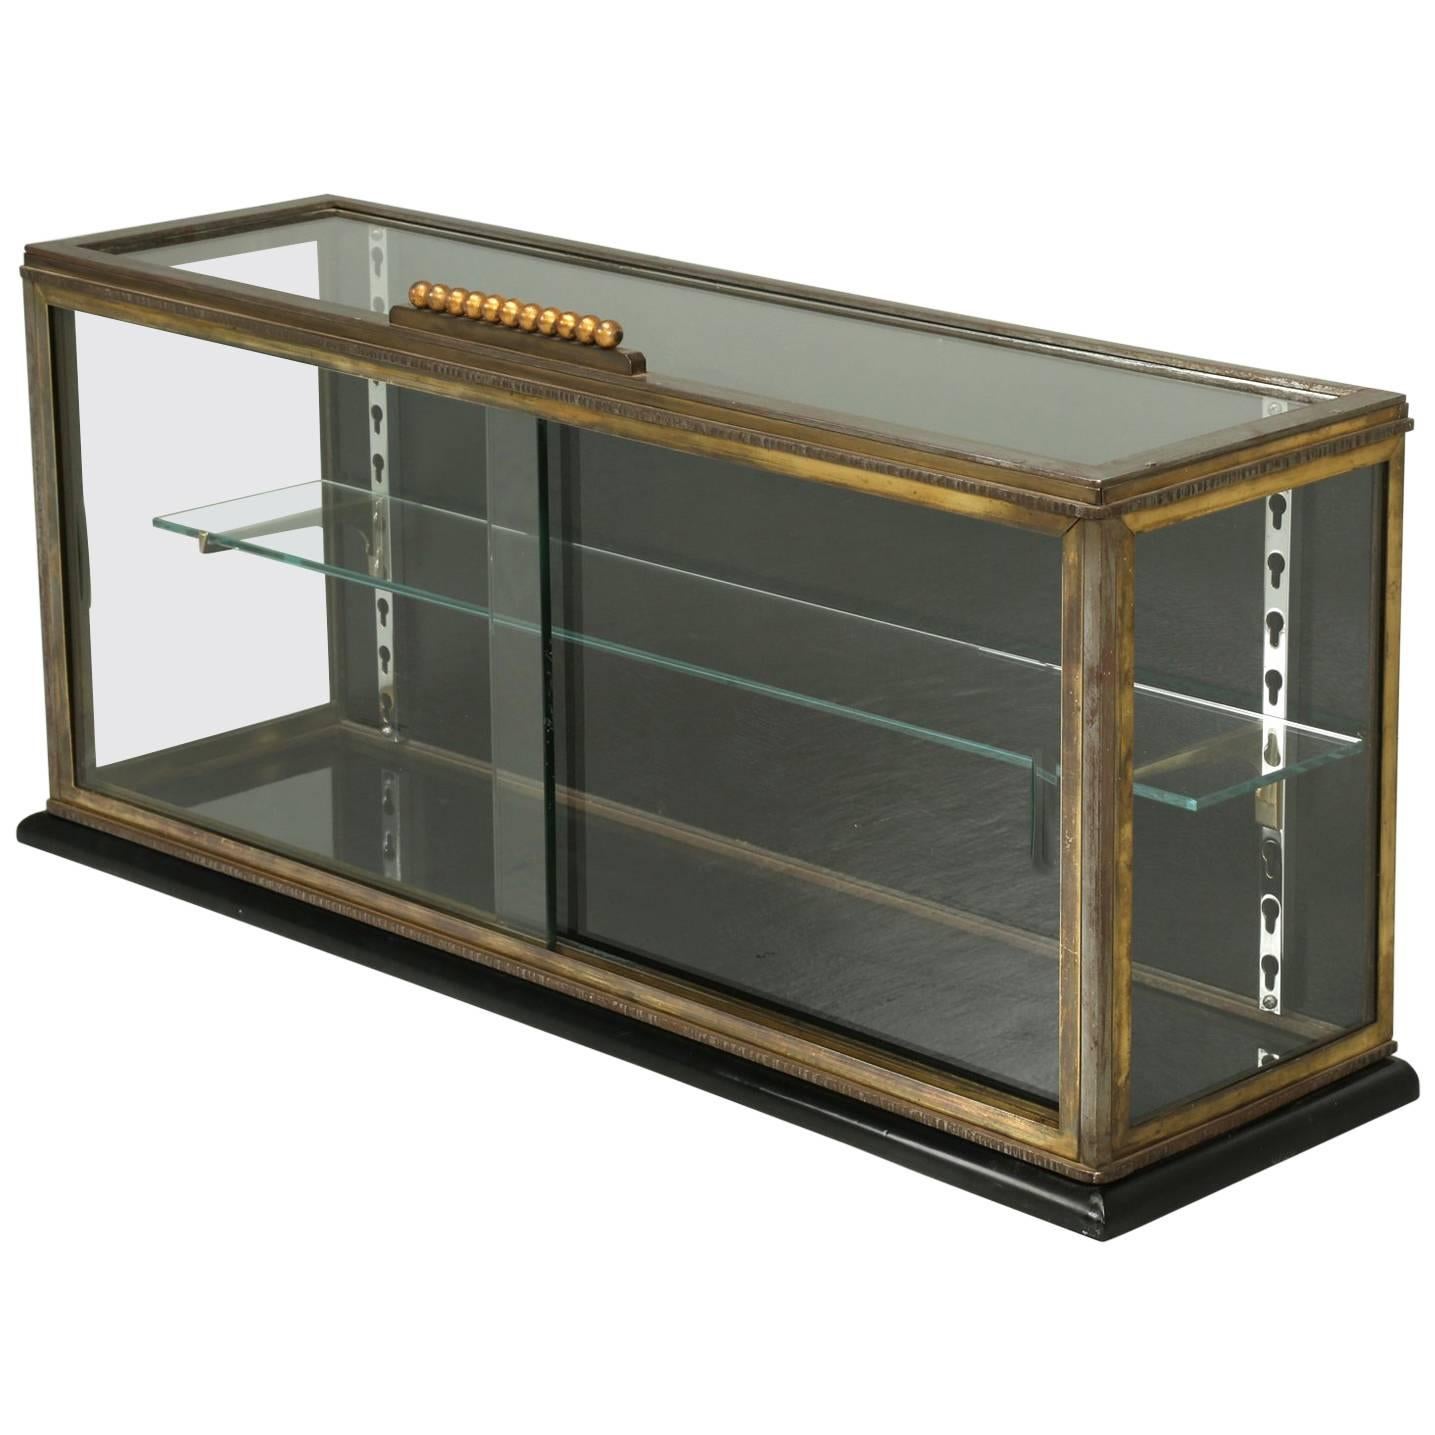 French Display Case or Curio Cabinet from the Art Deco Period